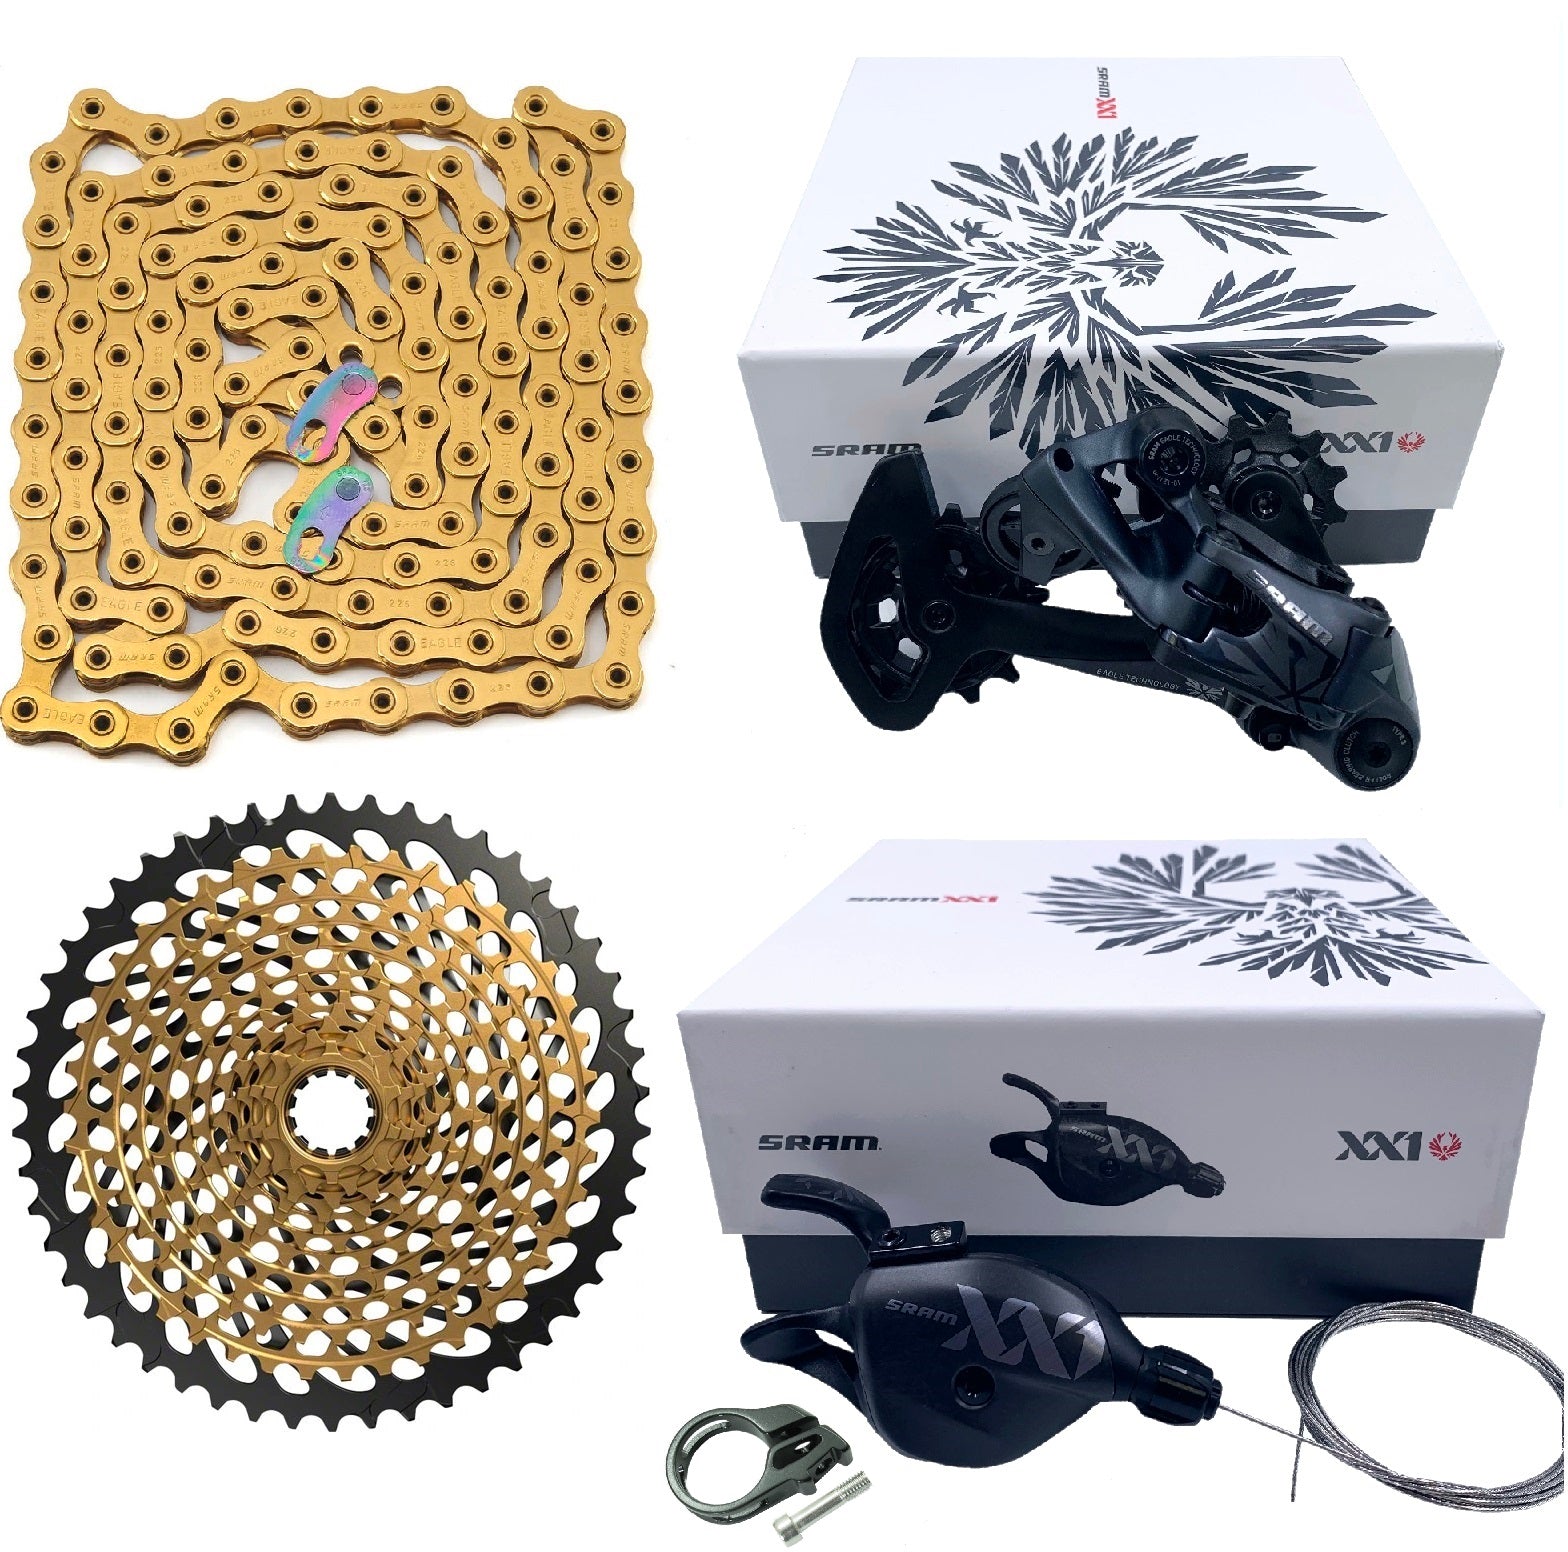 Buy gold-10-50t SRAM XX1 Eagle 12 Speed 4 Piece Trigger Shift Groupset